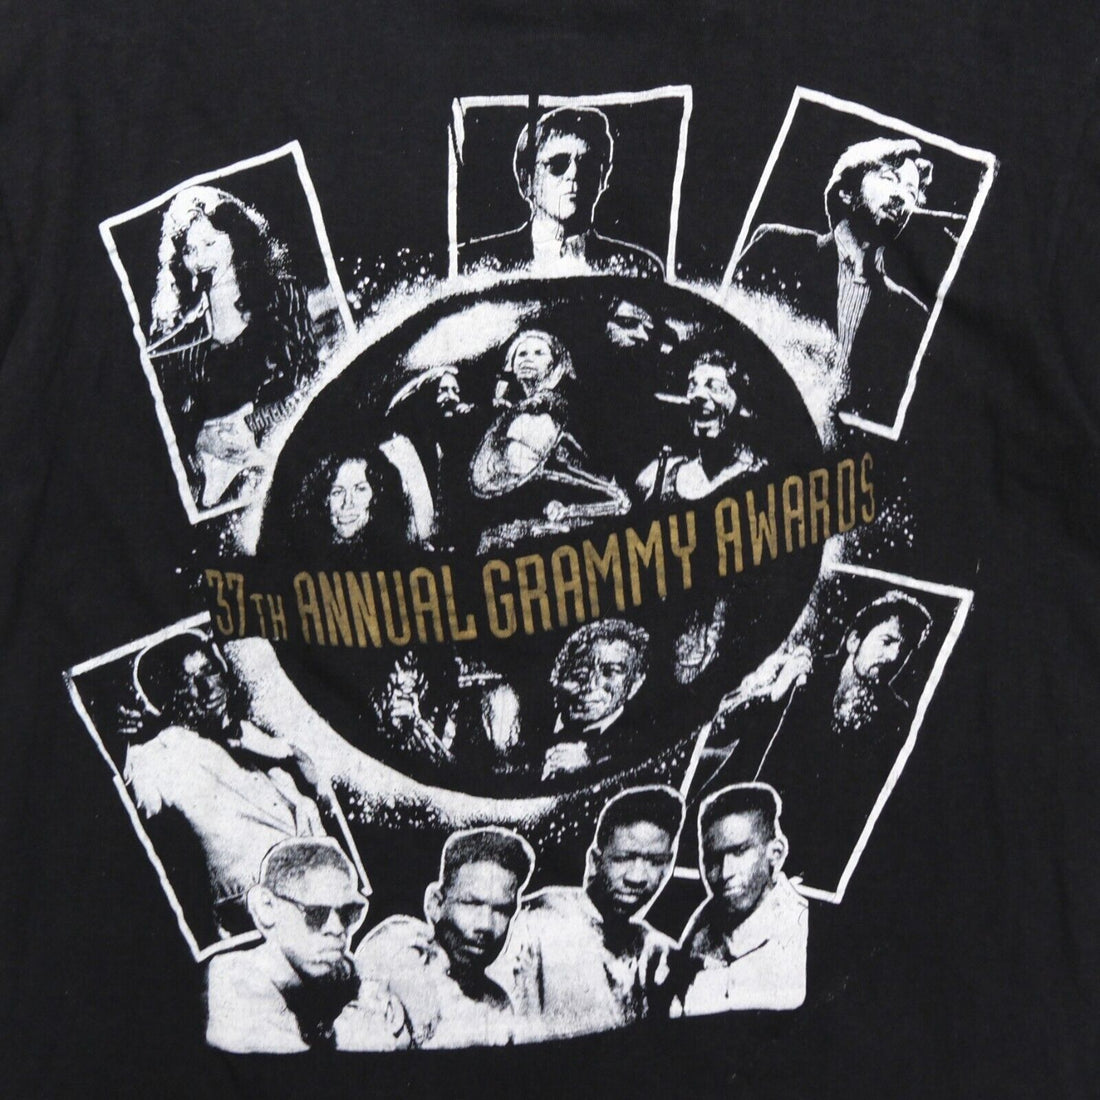 Vintage Grammy Awards T-Shirt Size Large Mariah Carey Luther Vandross 1995 90s